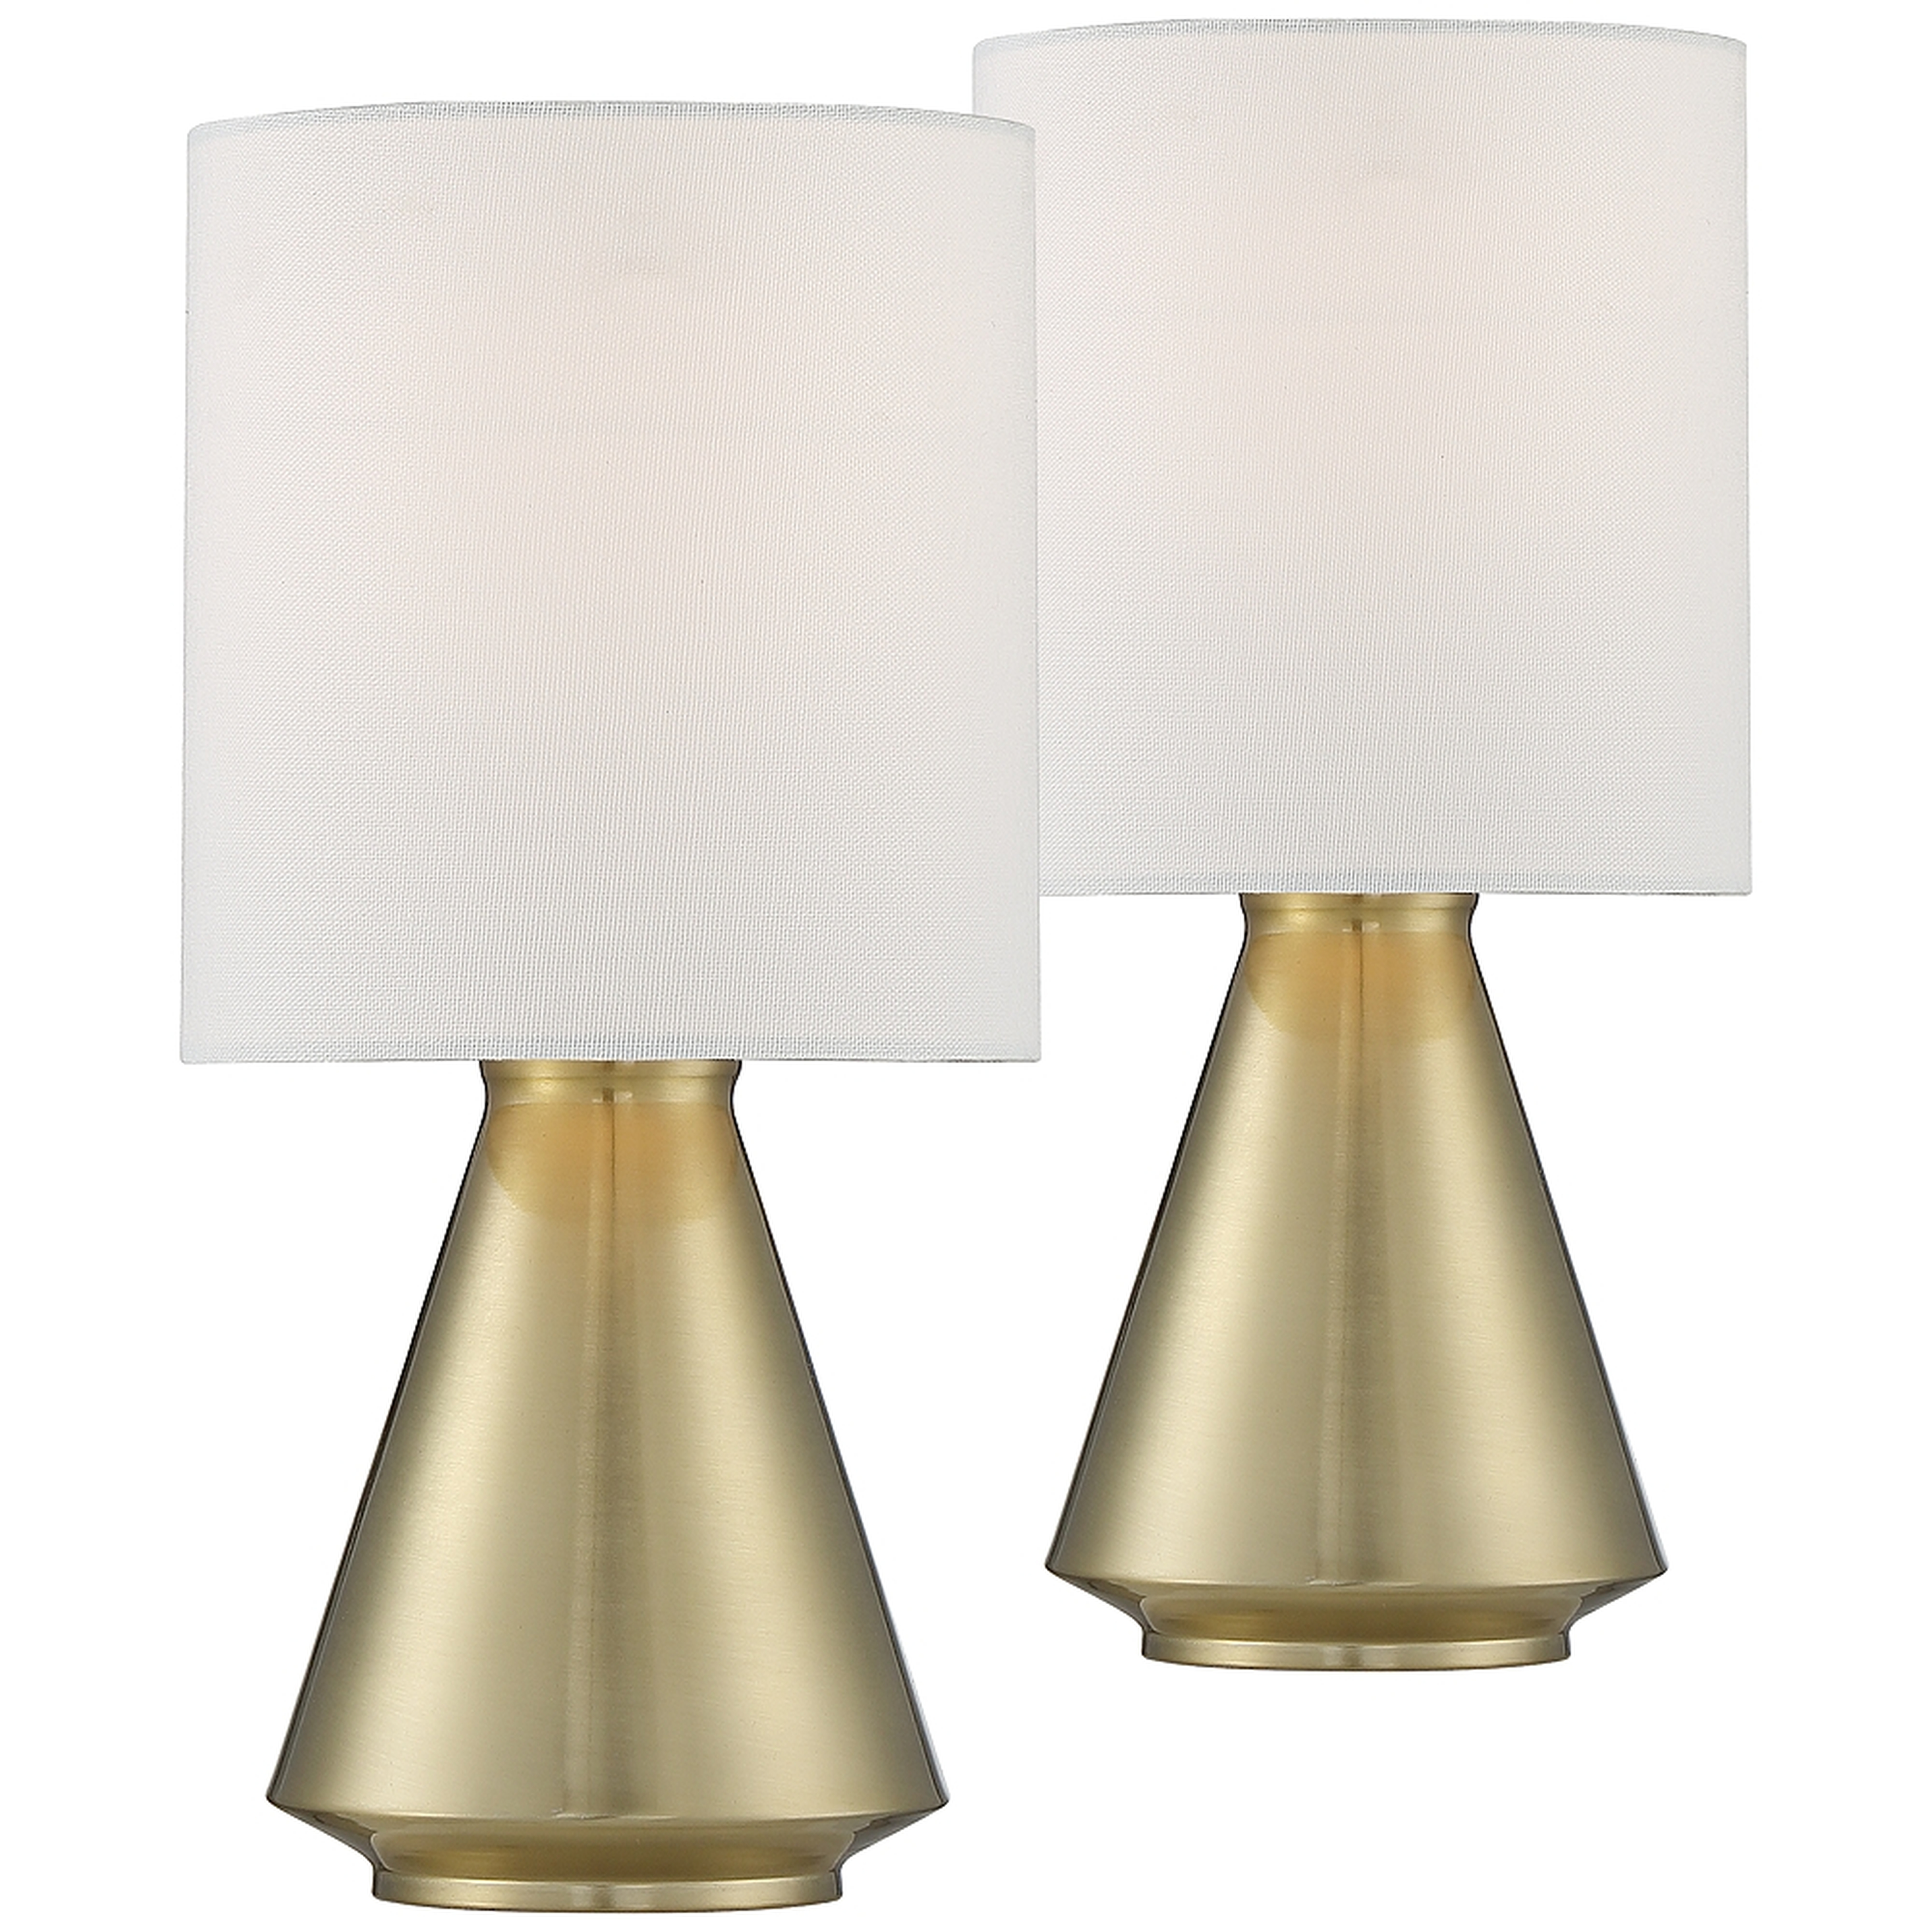 Beeker 14 1/2" High Brass Accent Table Lamps Set of 2 - Style # 76A96 - Lamps Plus